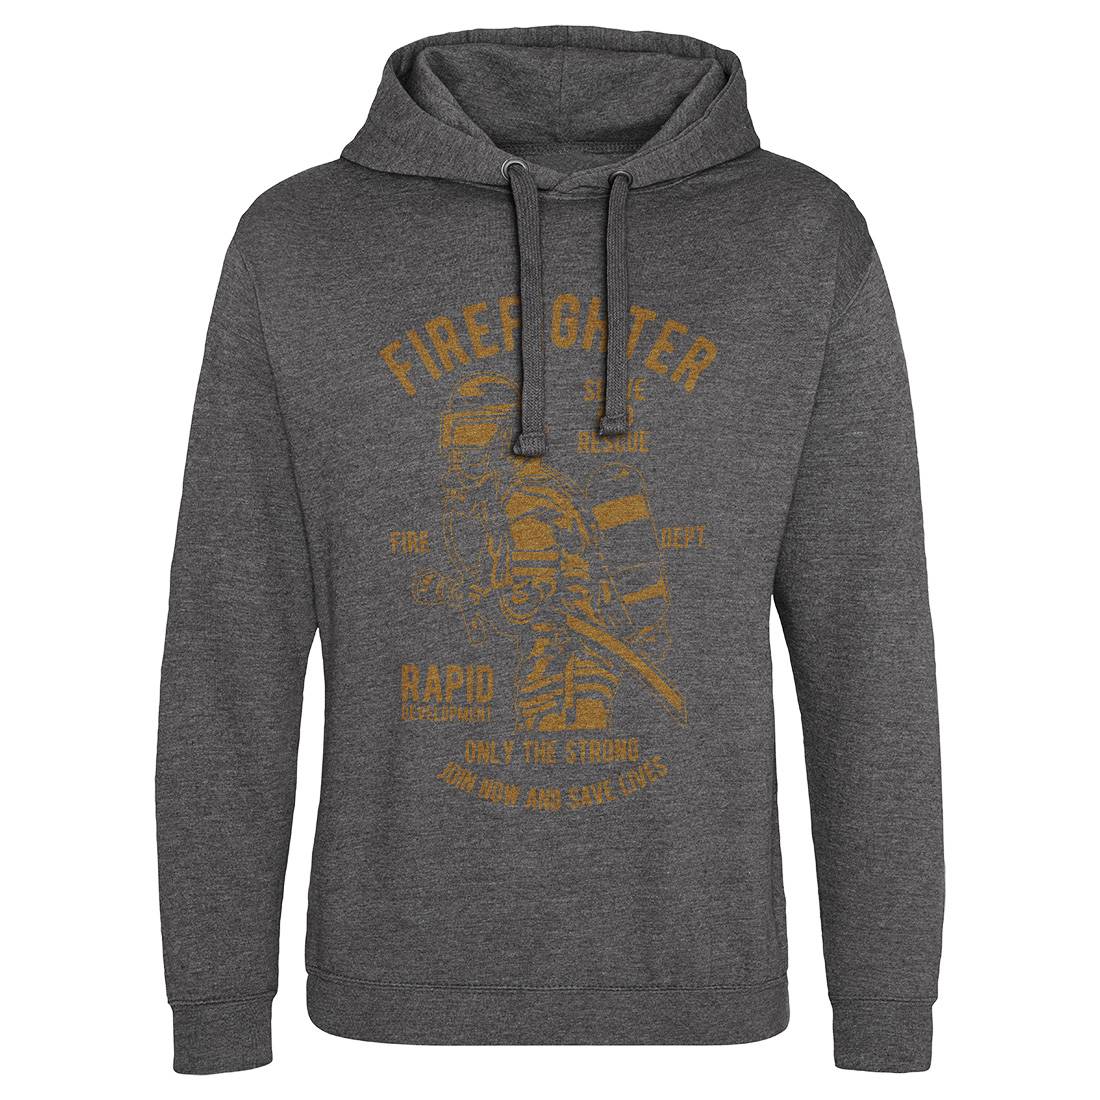 Firefighter Dept Mens Hoodie Without Pocket Firefighters B207